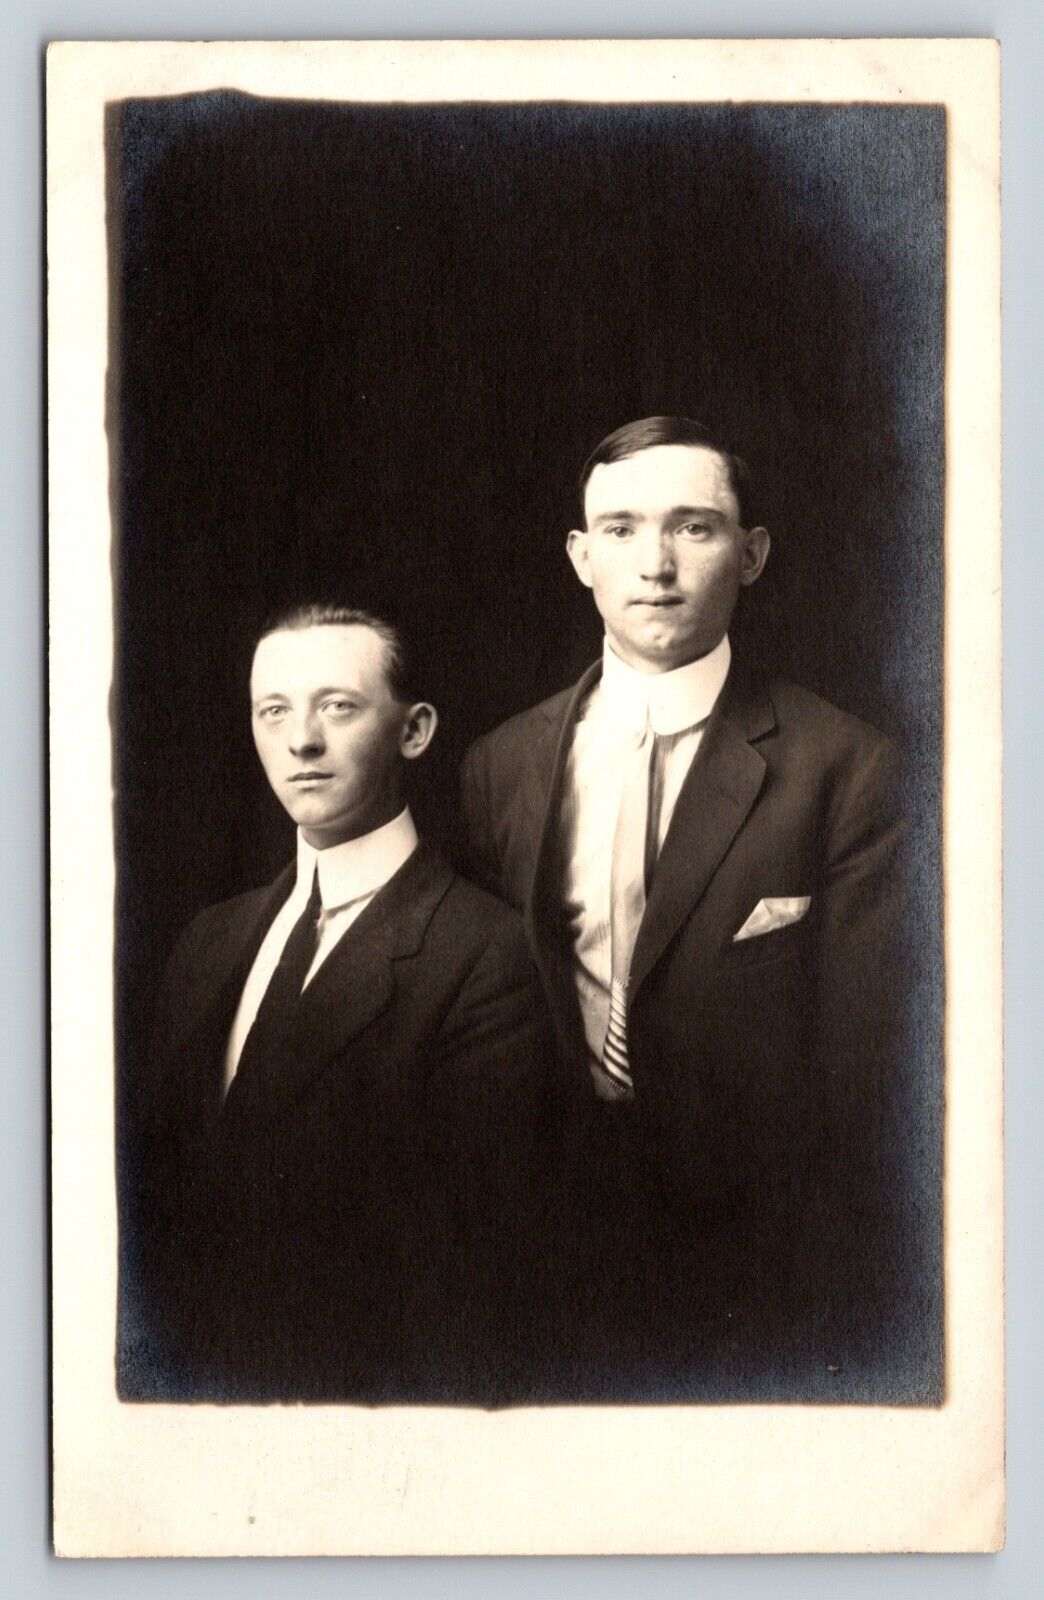 RPPC Two Men in Suits & Ties with Slick Hair AZO 1904-1918 ANTIQUE Postcard 1313